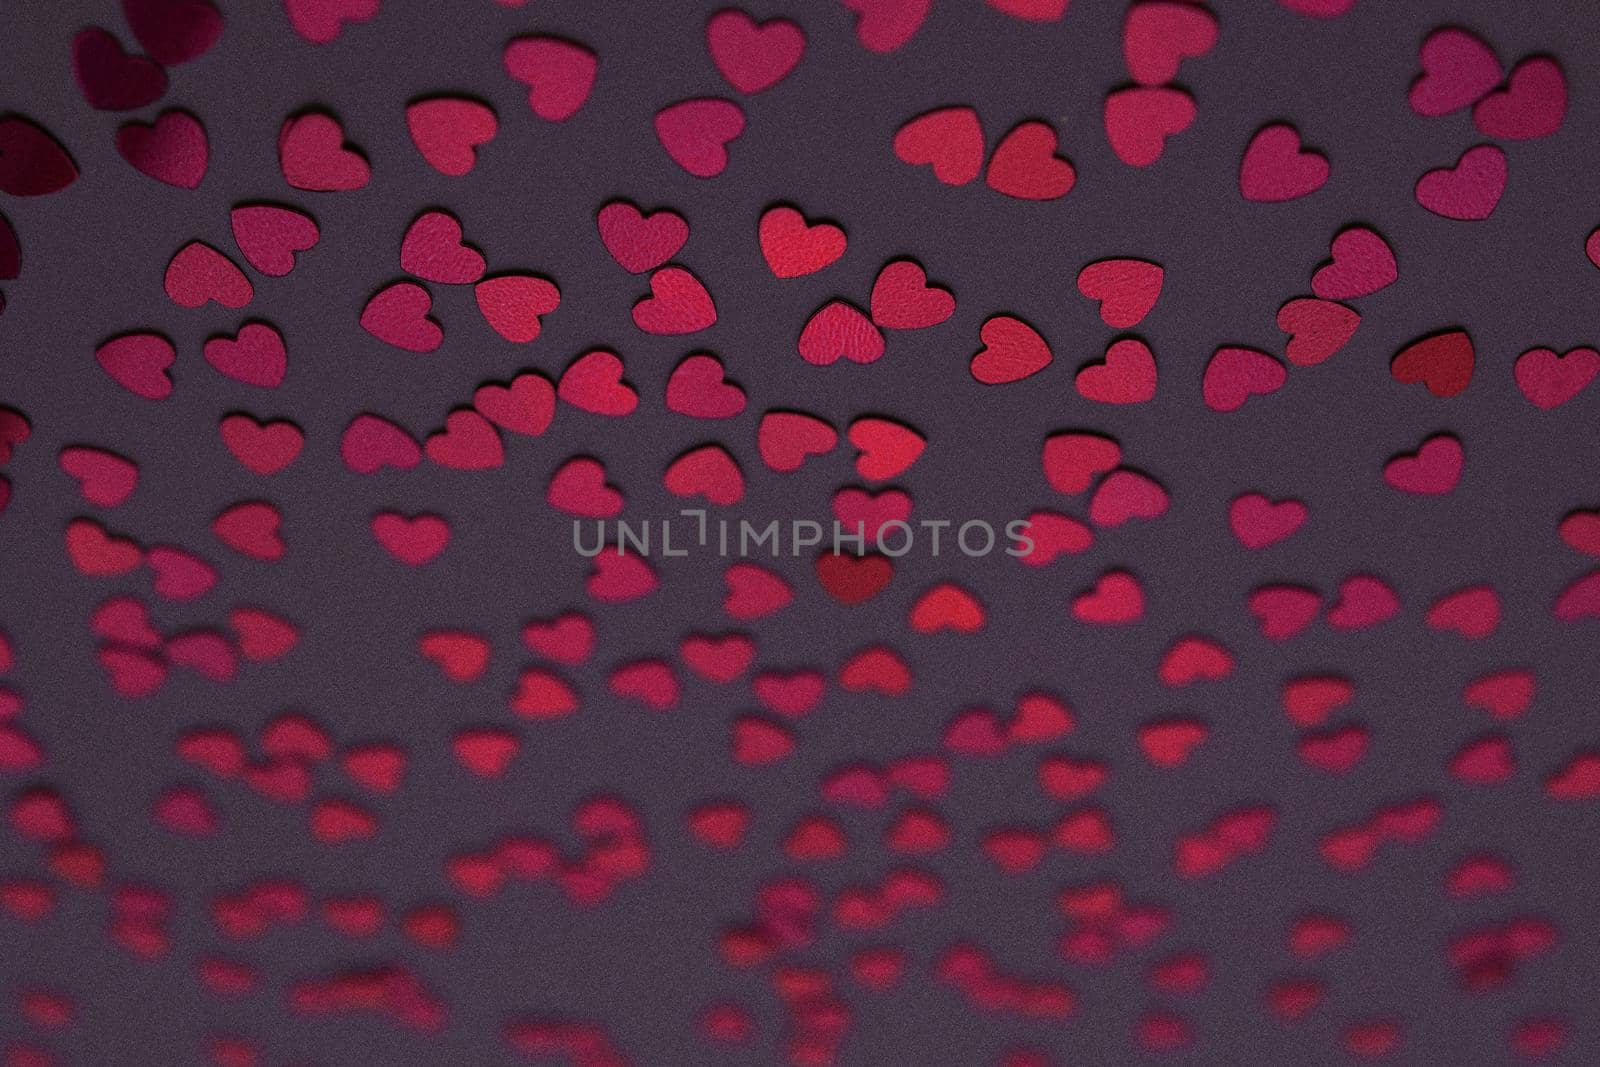 Beautiful heart confetti falling on the dark background. Invitation Template Background design, greeting cards, poster. Valentine's Day